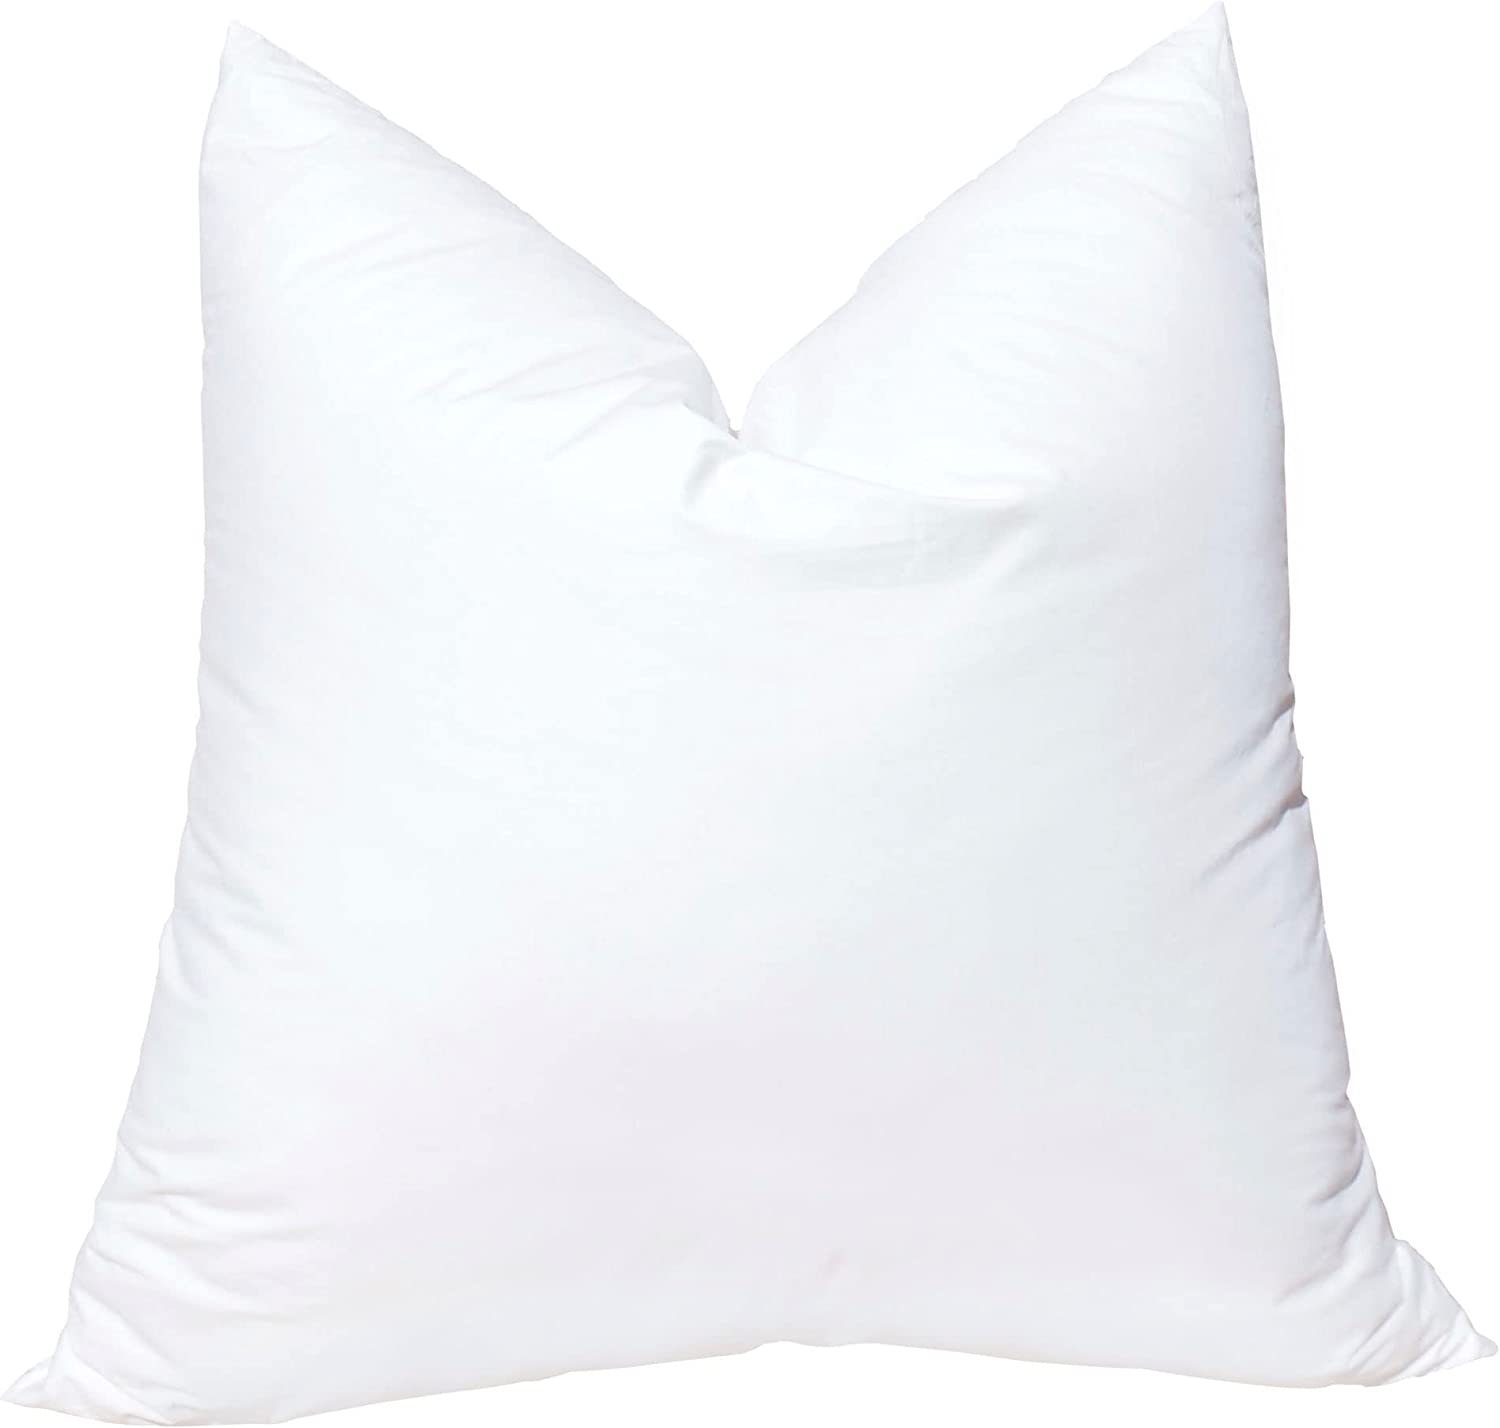 Pillowflex Pillow Form Insert - Machine Washable (12 Inch By 18 Inch) for  sale online